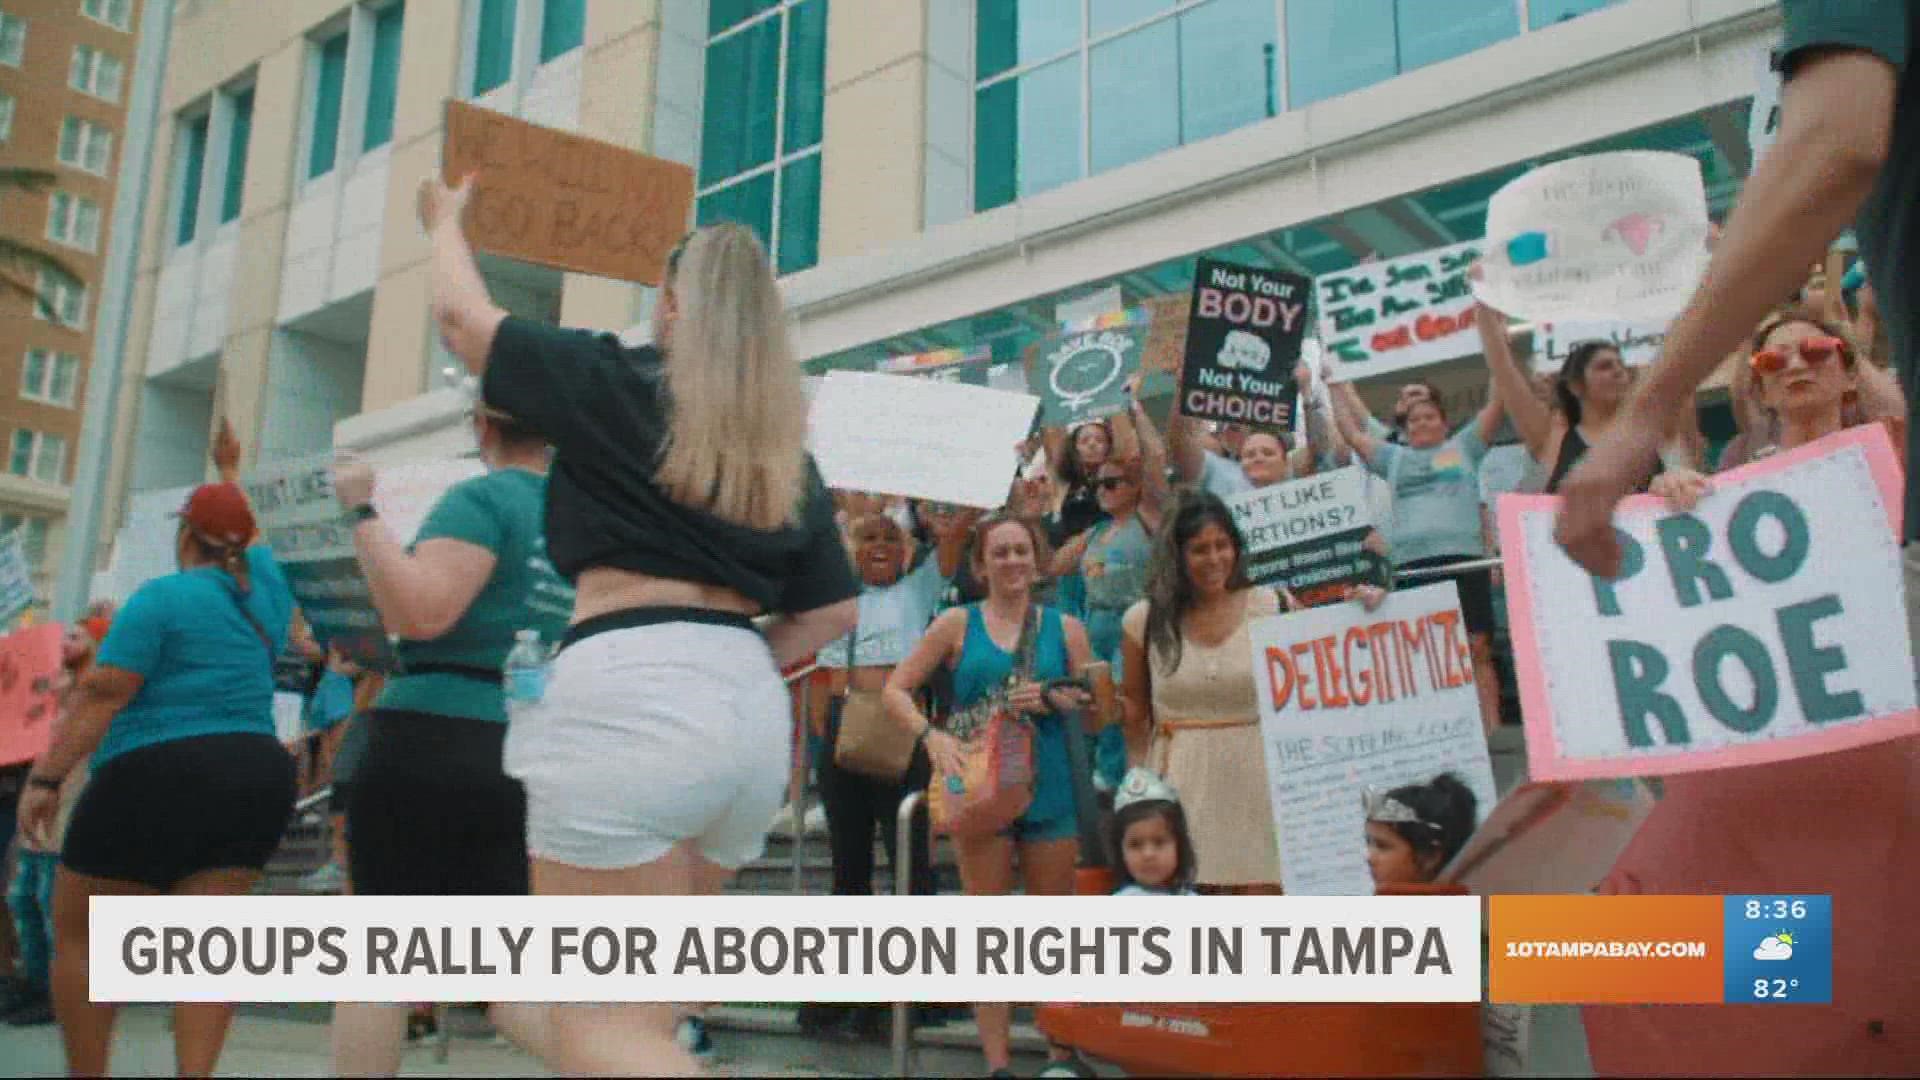 Florida's ban on most abortions after 15 weeks is now in effect, however, a Tallahassee judge vowed to temporarily block it after stating it's unconstitutional.